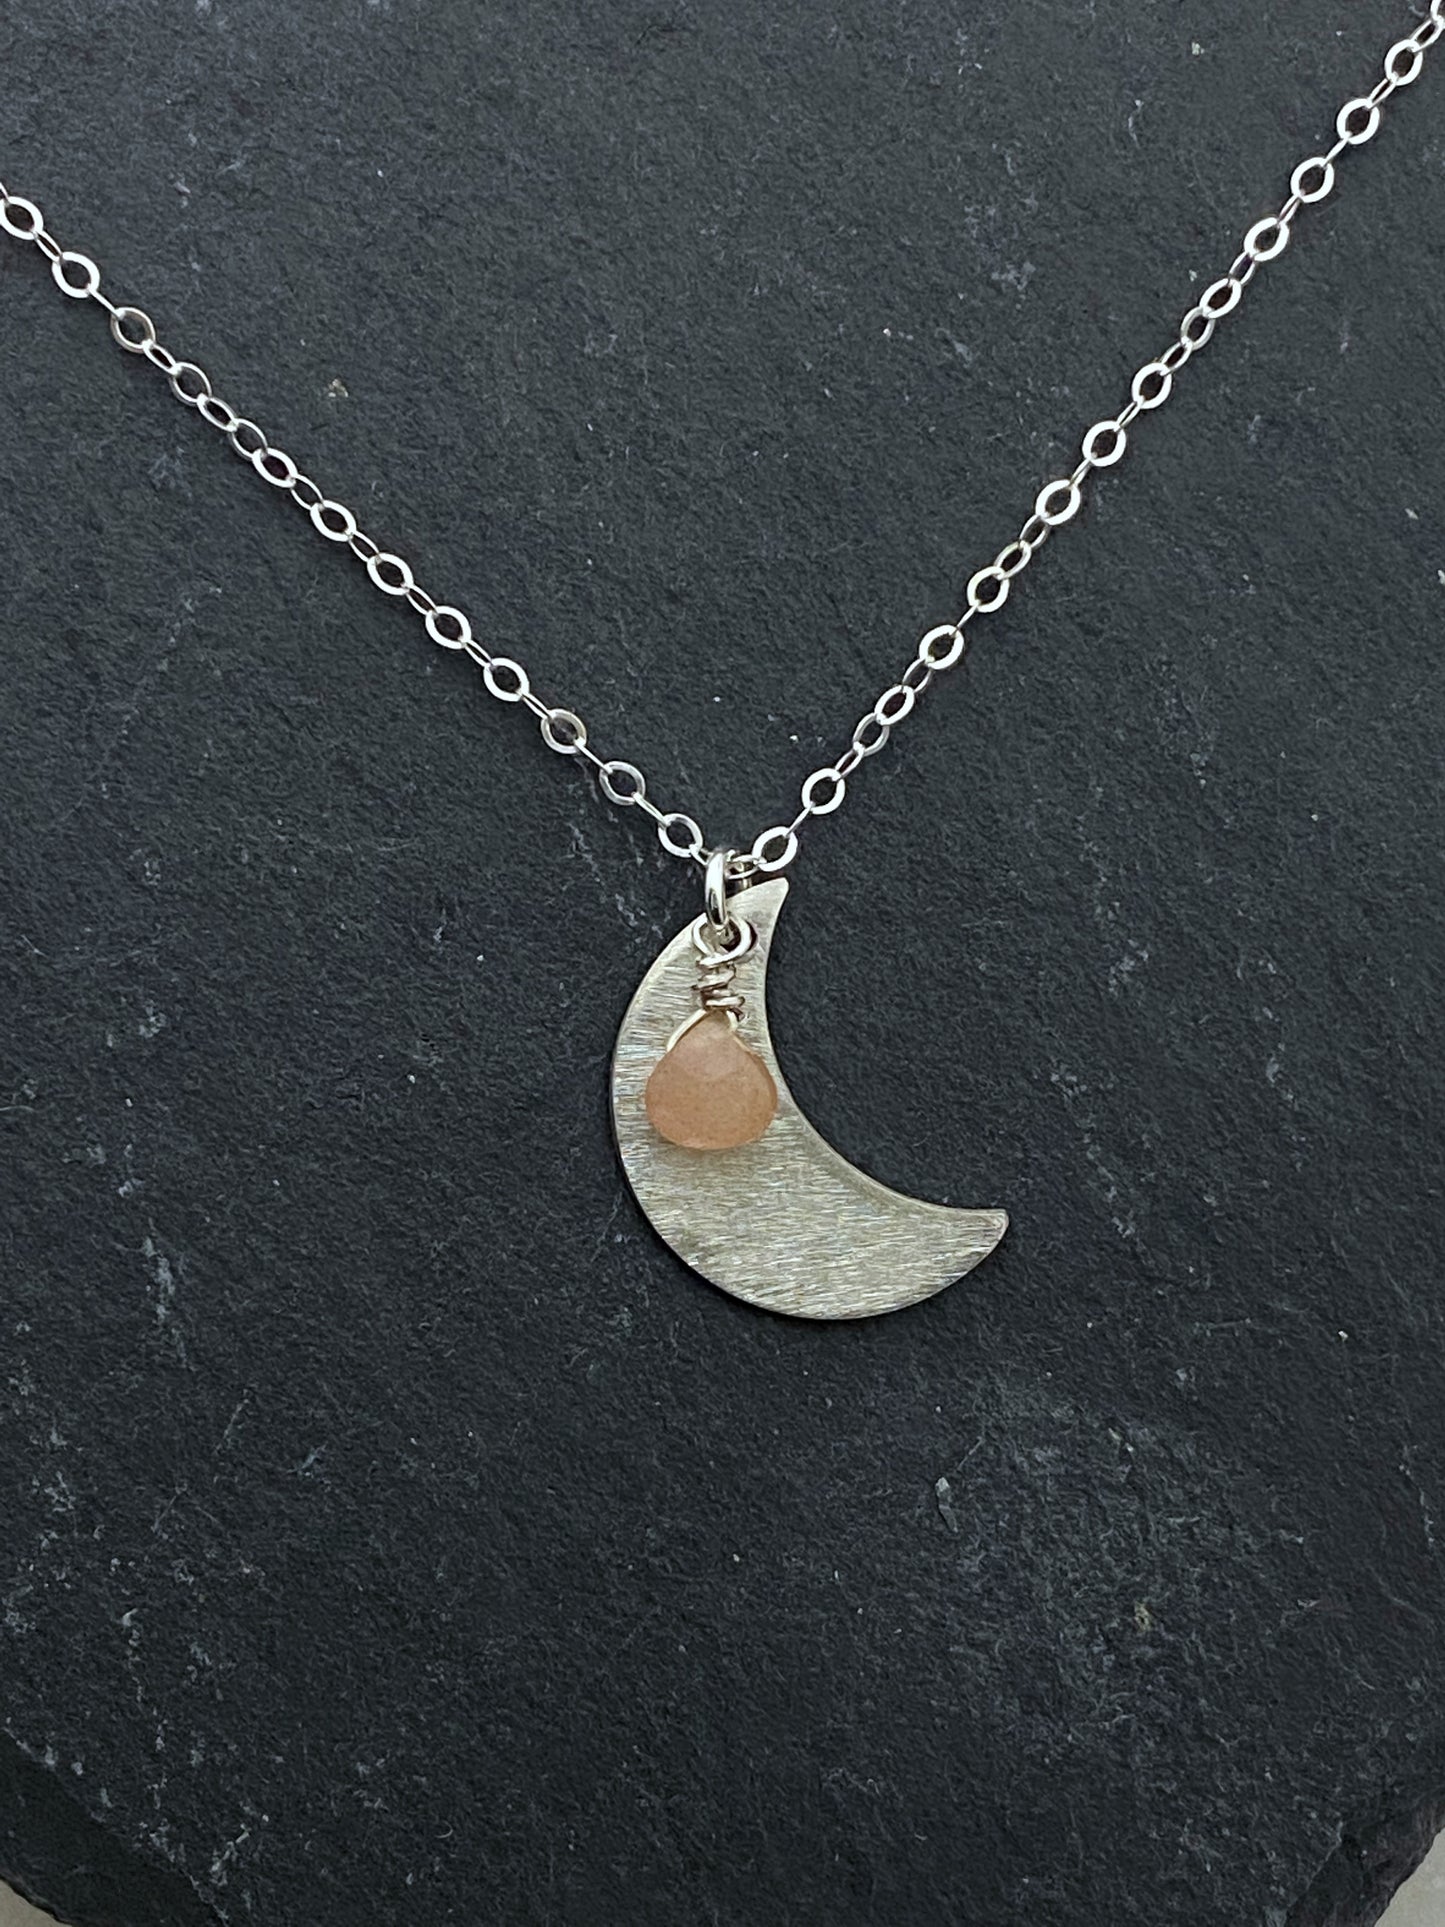 Forged sterling silver moon necklace with peach moonstone